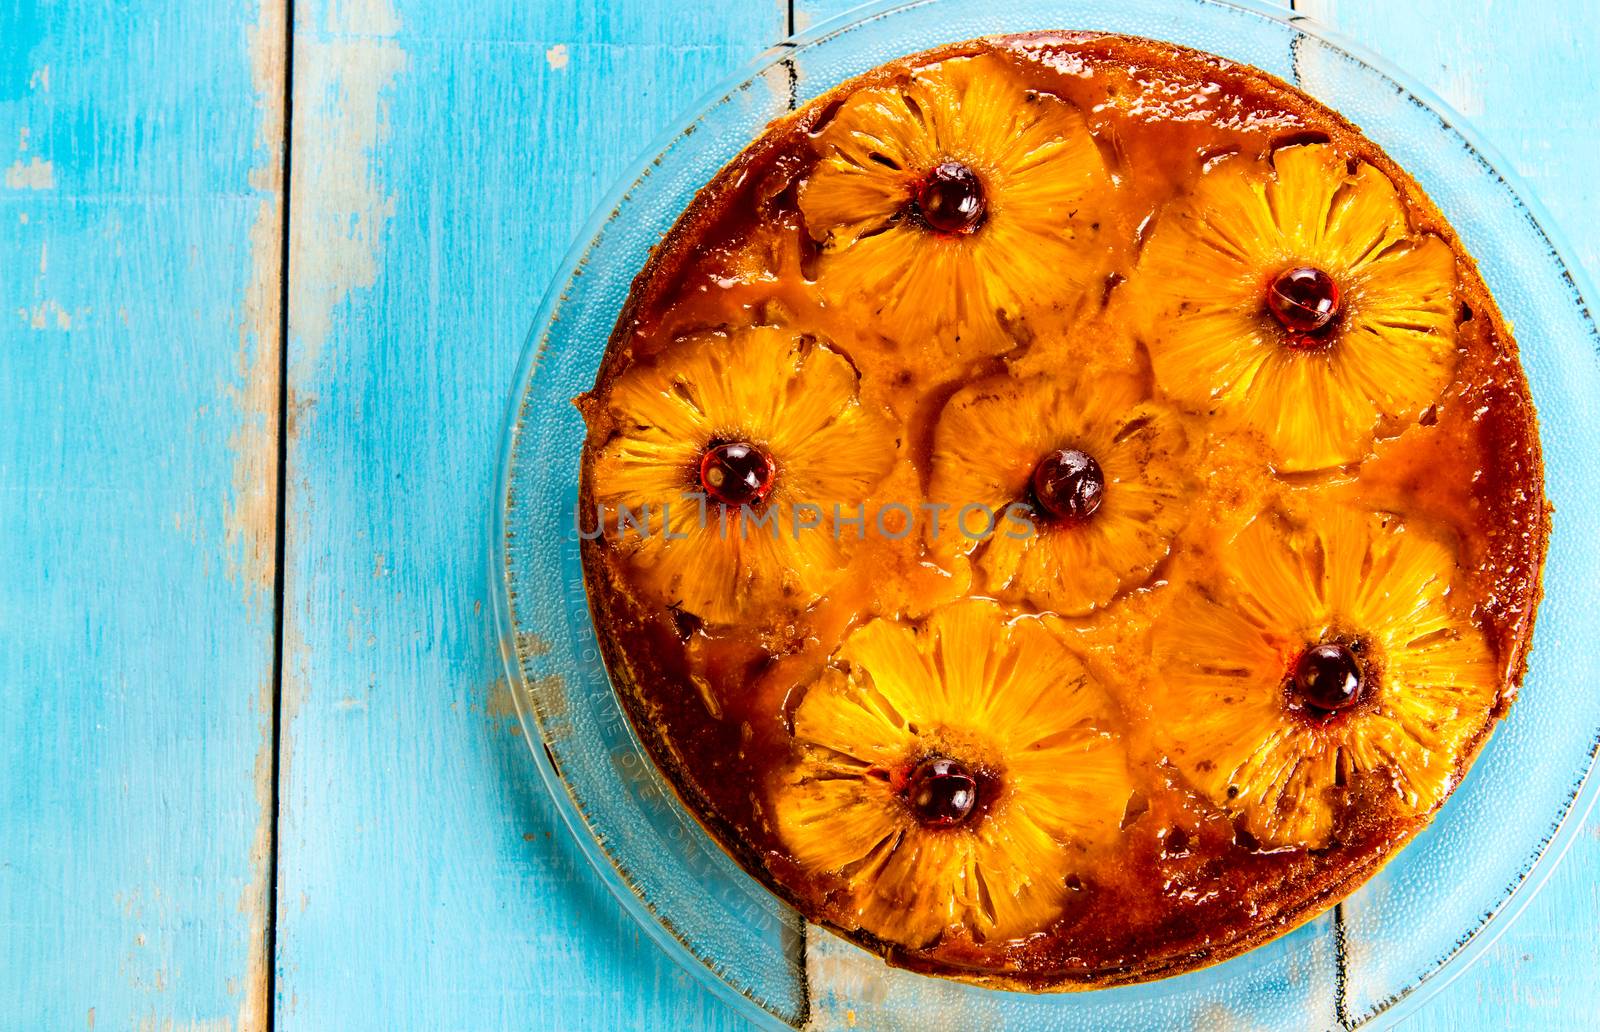 Upside down pineapple cake with caramel.